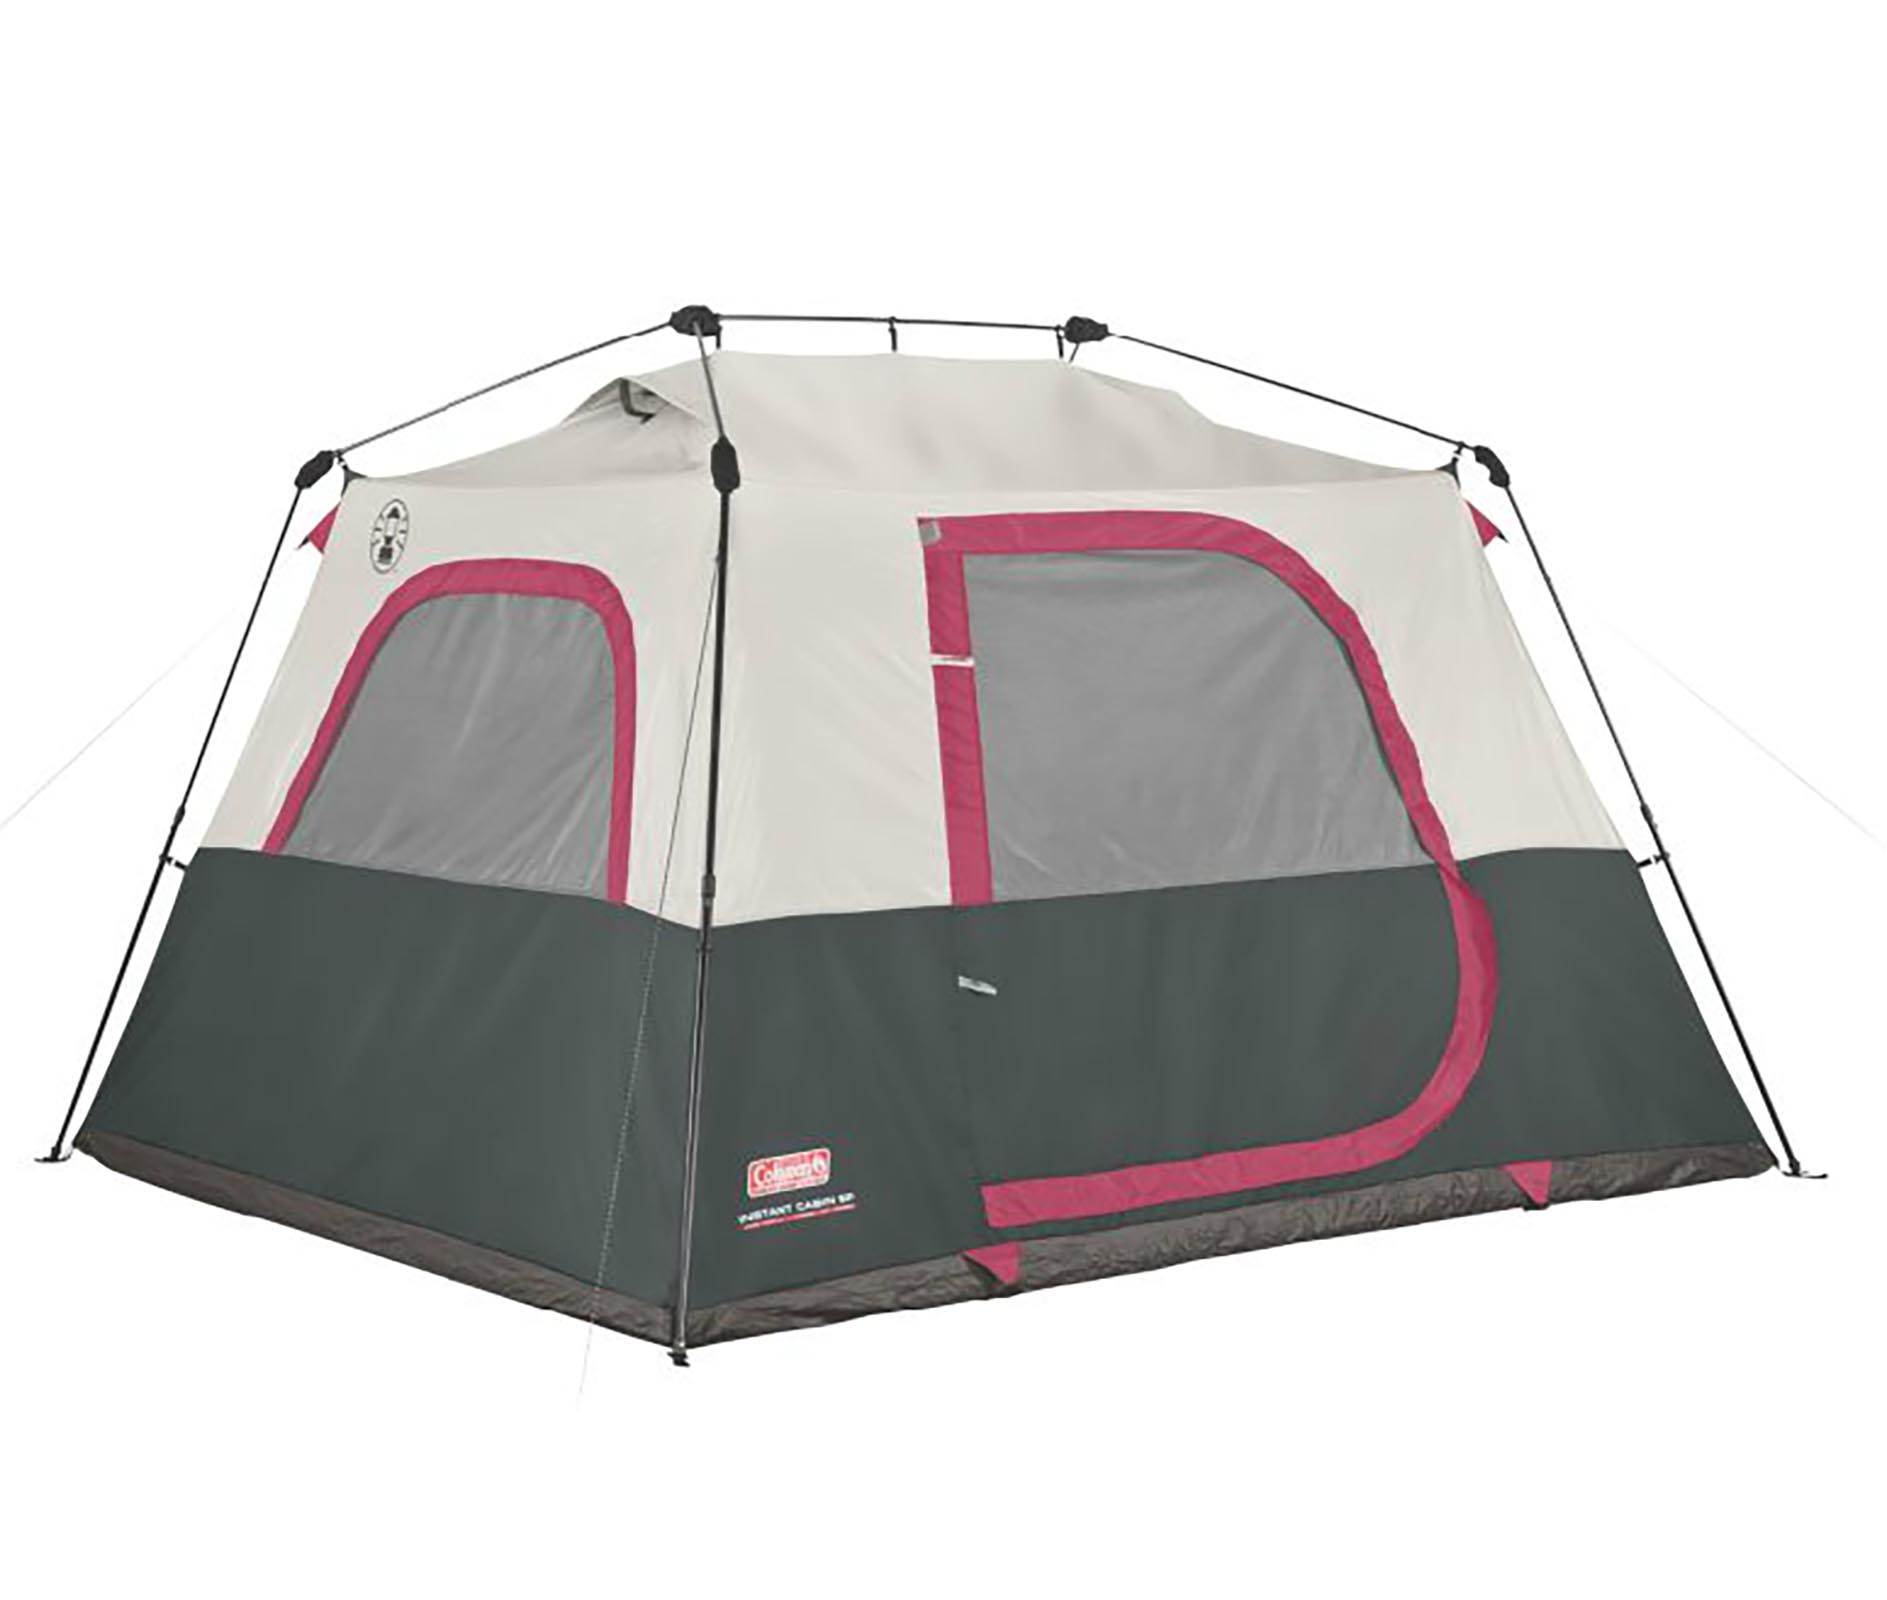 Coleman 6-Person Family Waterproof Camping Instant Cabin Tent 10 x 9 x 6 Feet - image 1 of 7